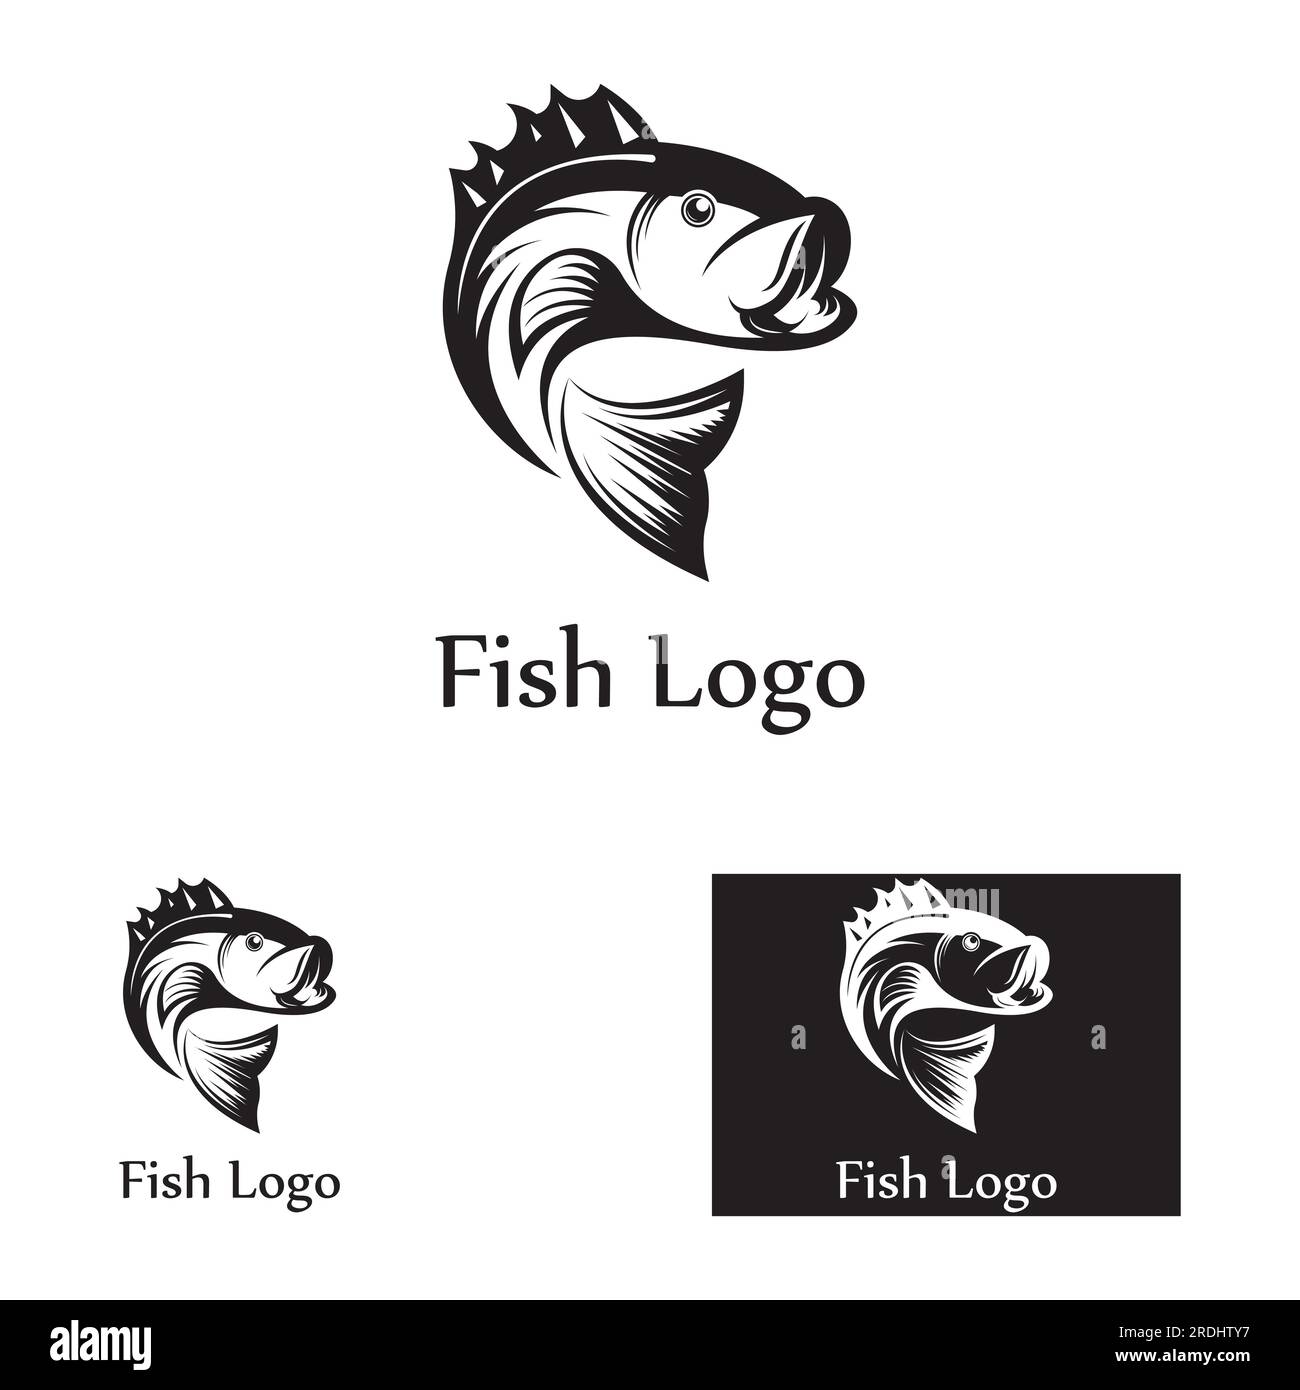 Fish logo, fishinghook, fish oil and seafood restaurant icon. With vector icon concept Stock Vector